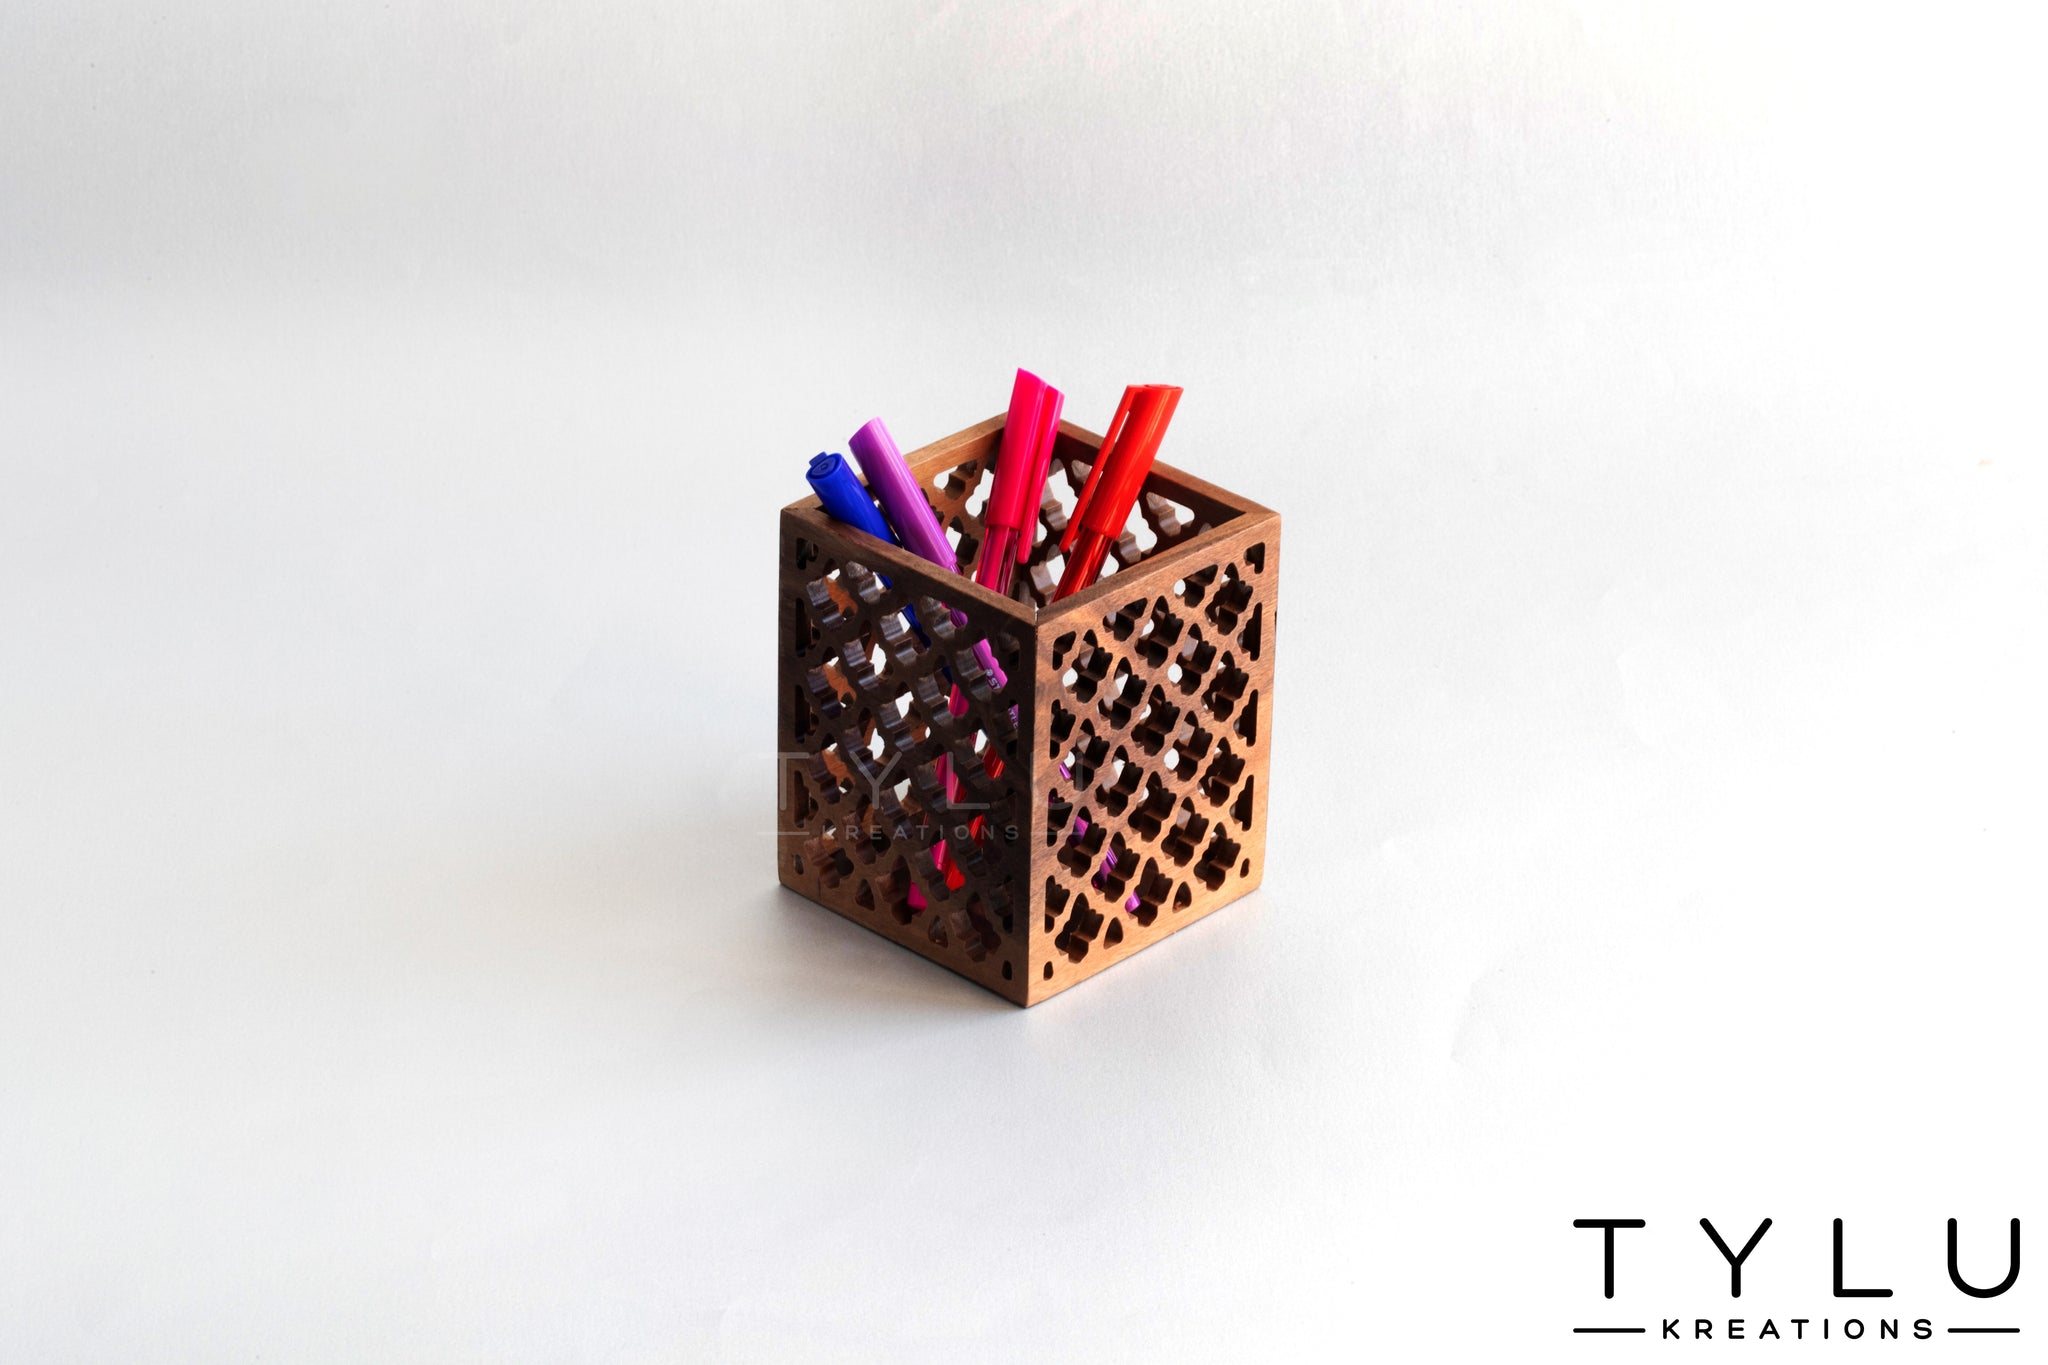 Patterned Pen Stand